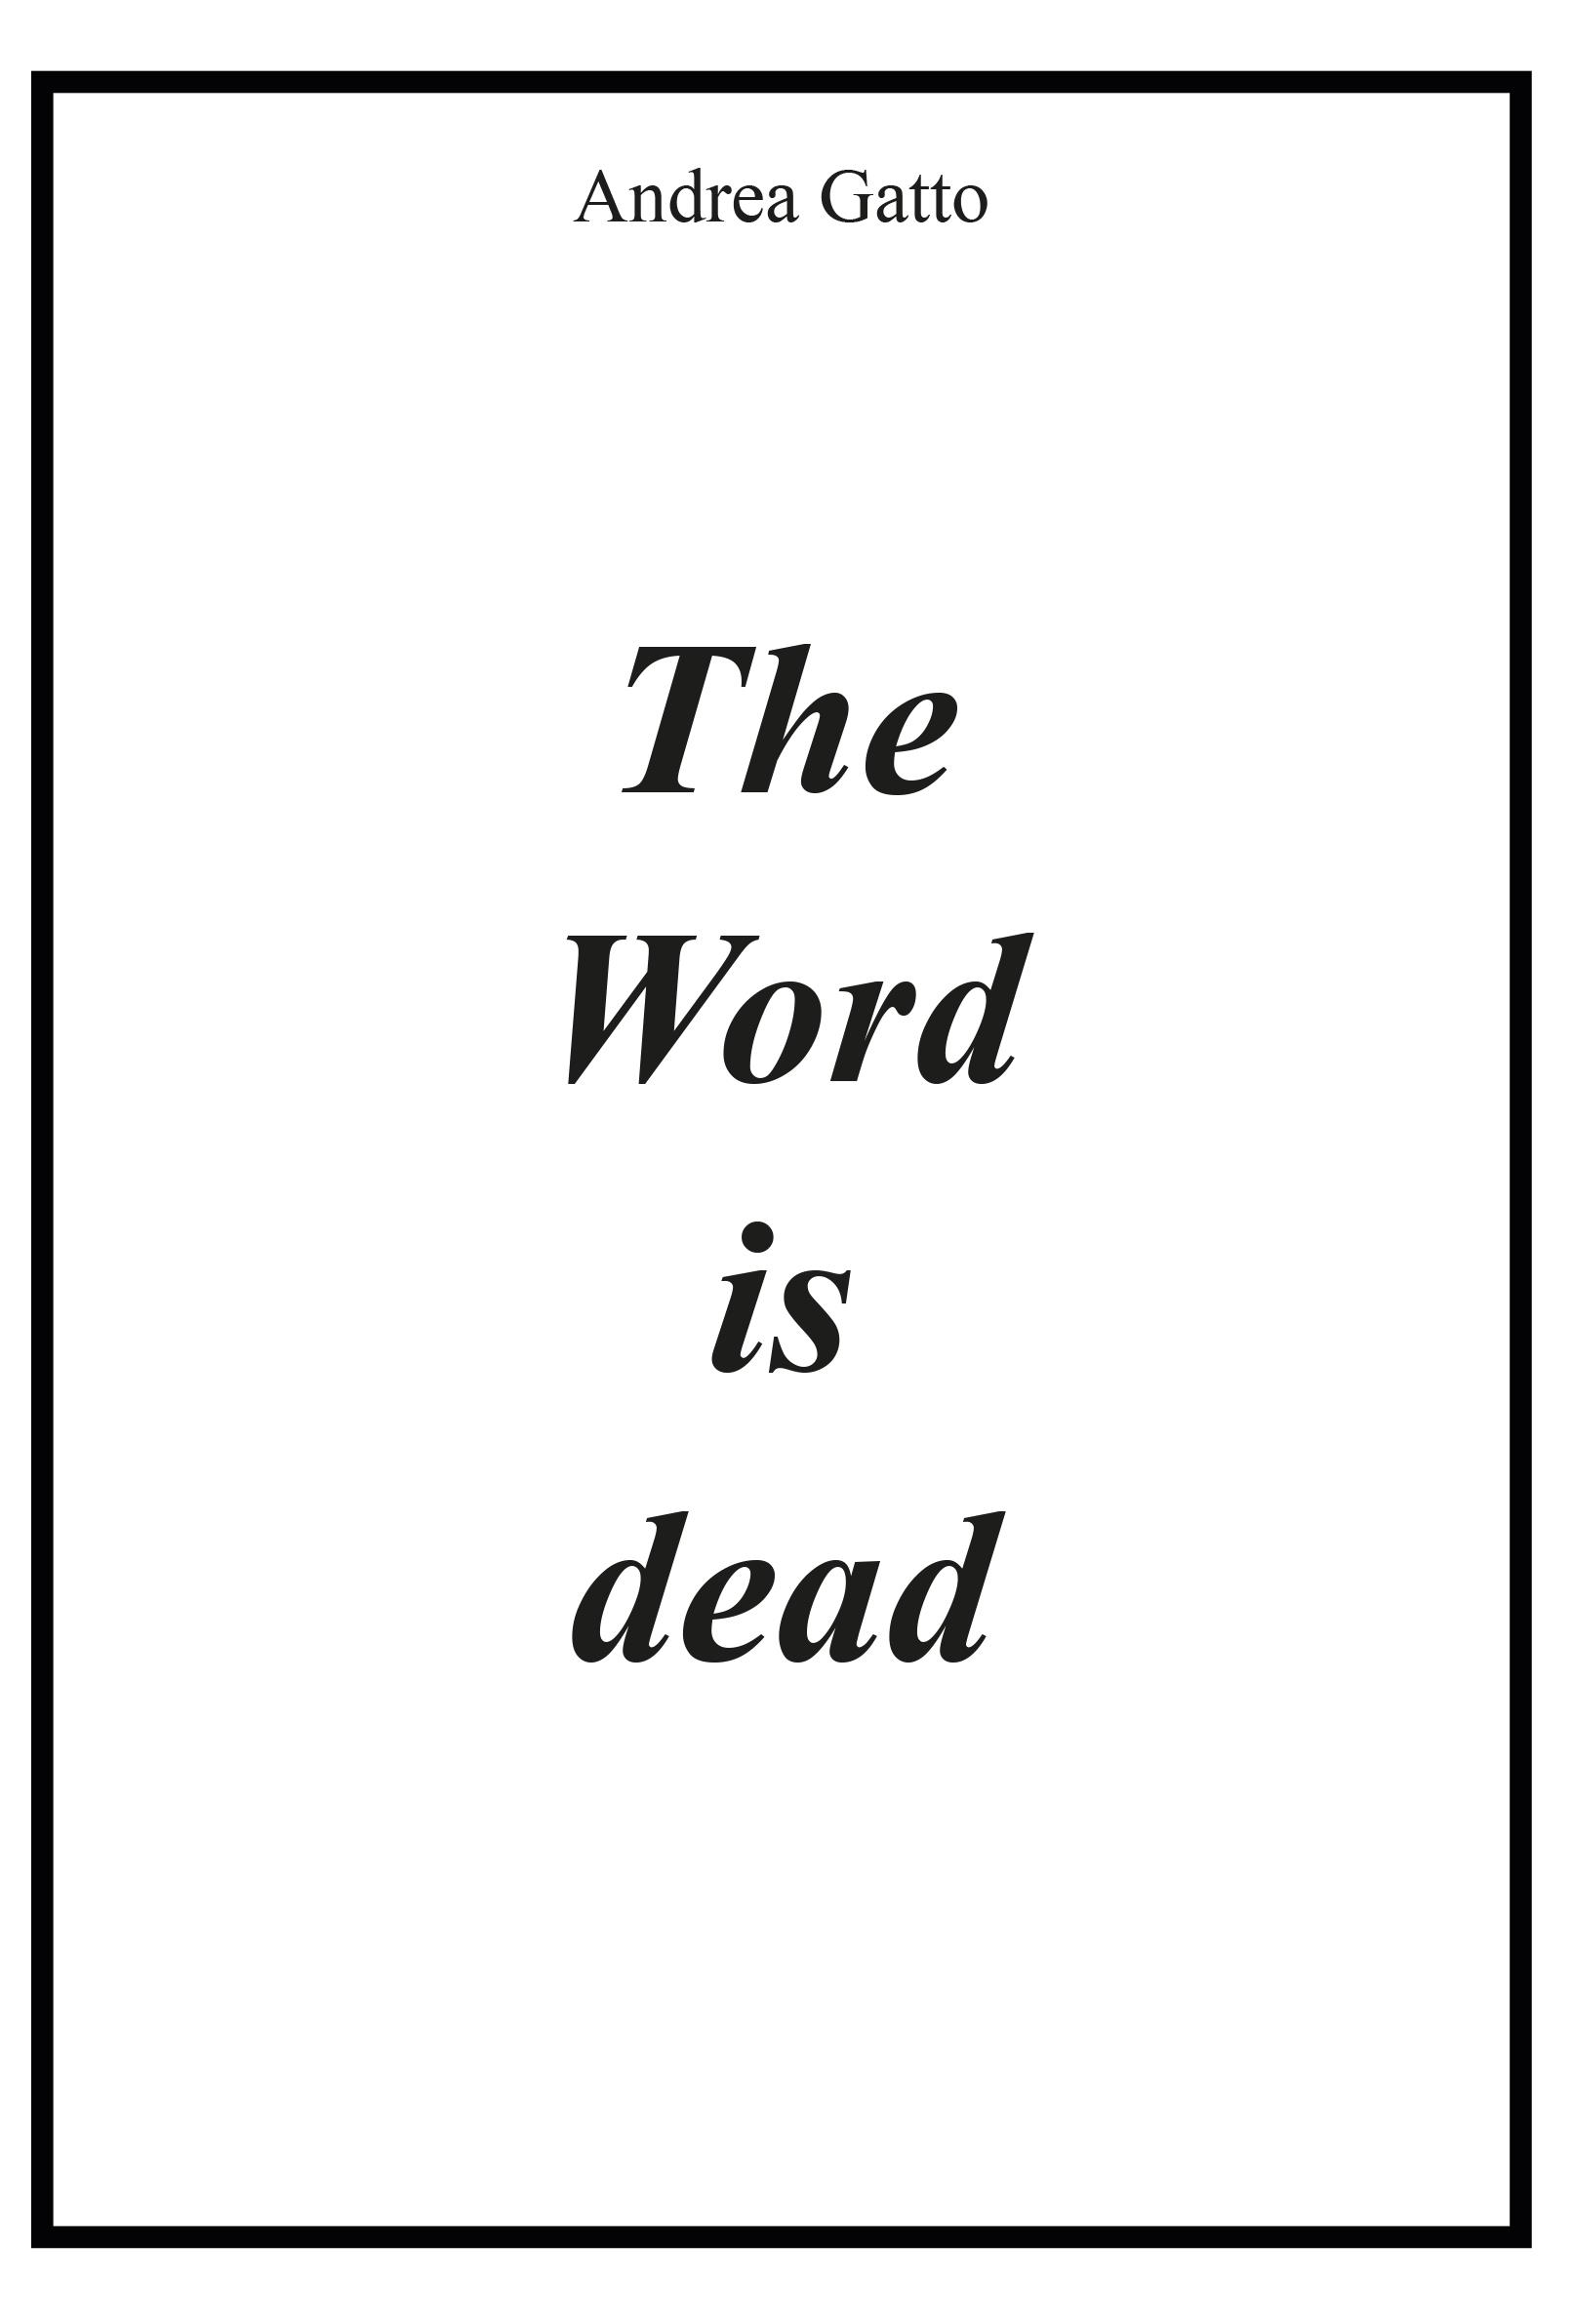 The Word is dead